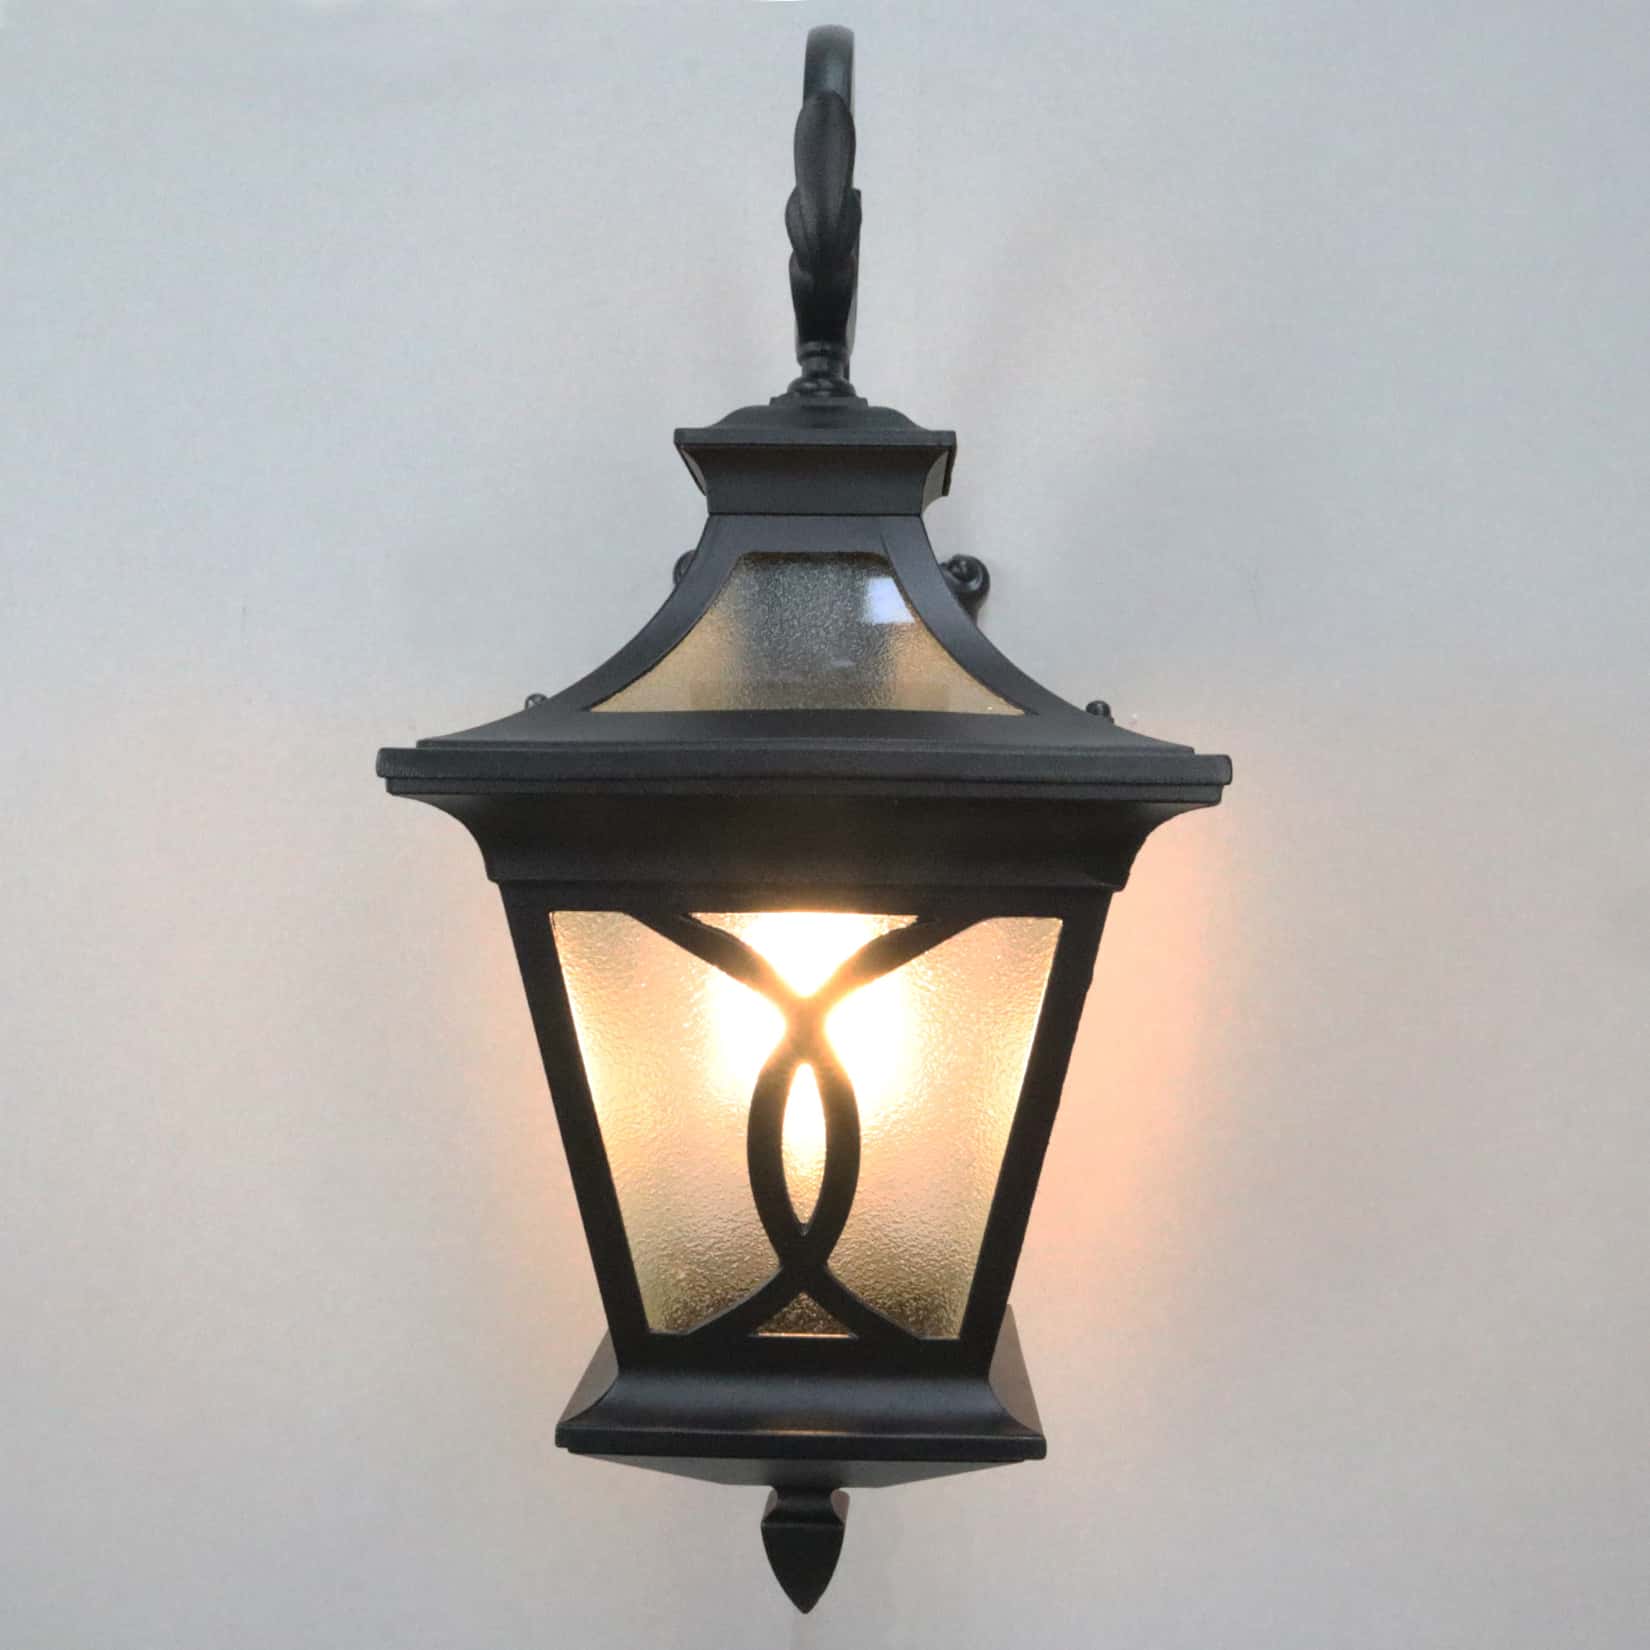 Black Outdoor Wall Sconce Light with Water Glass Shade